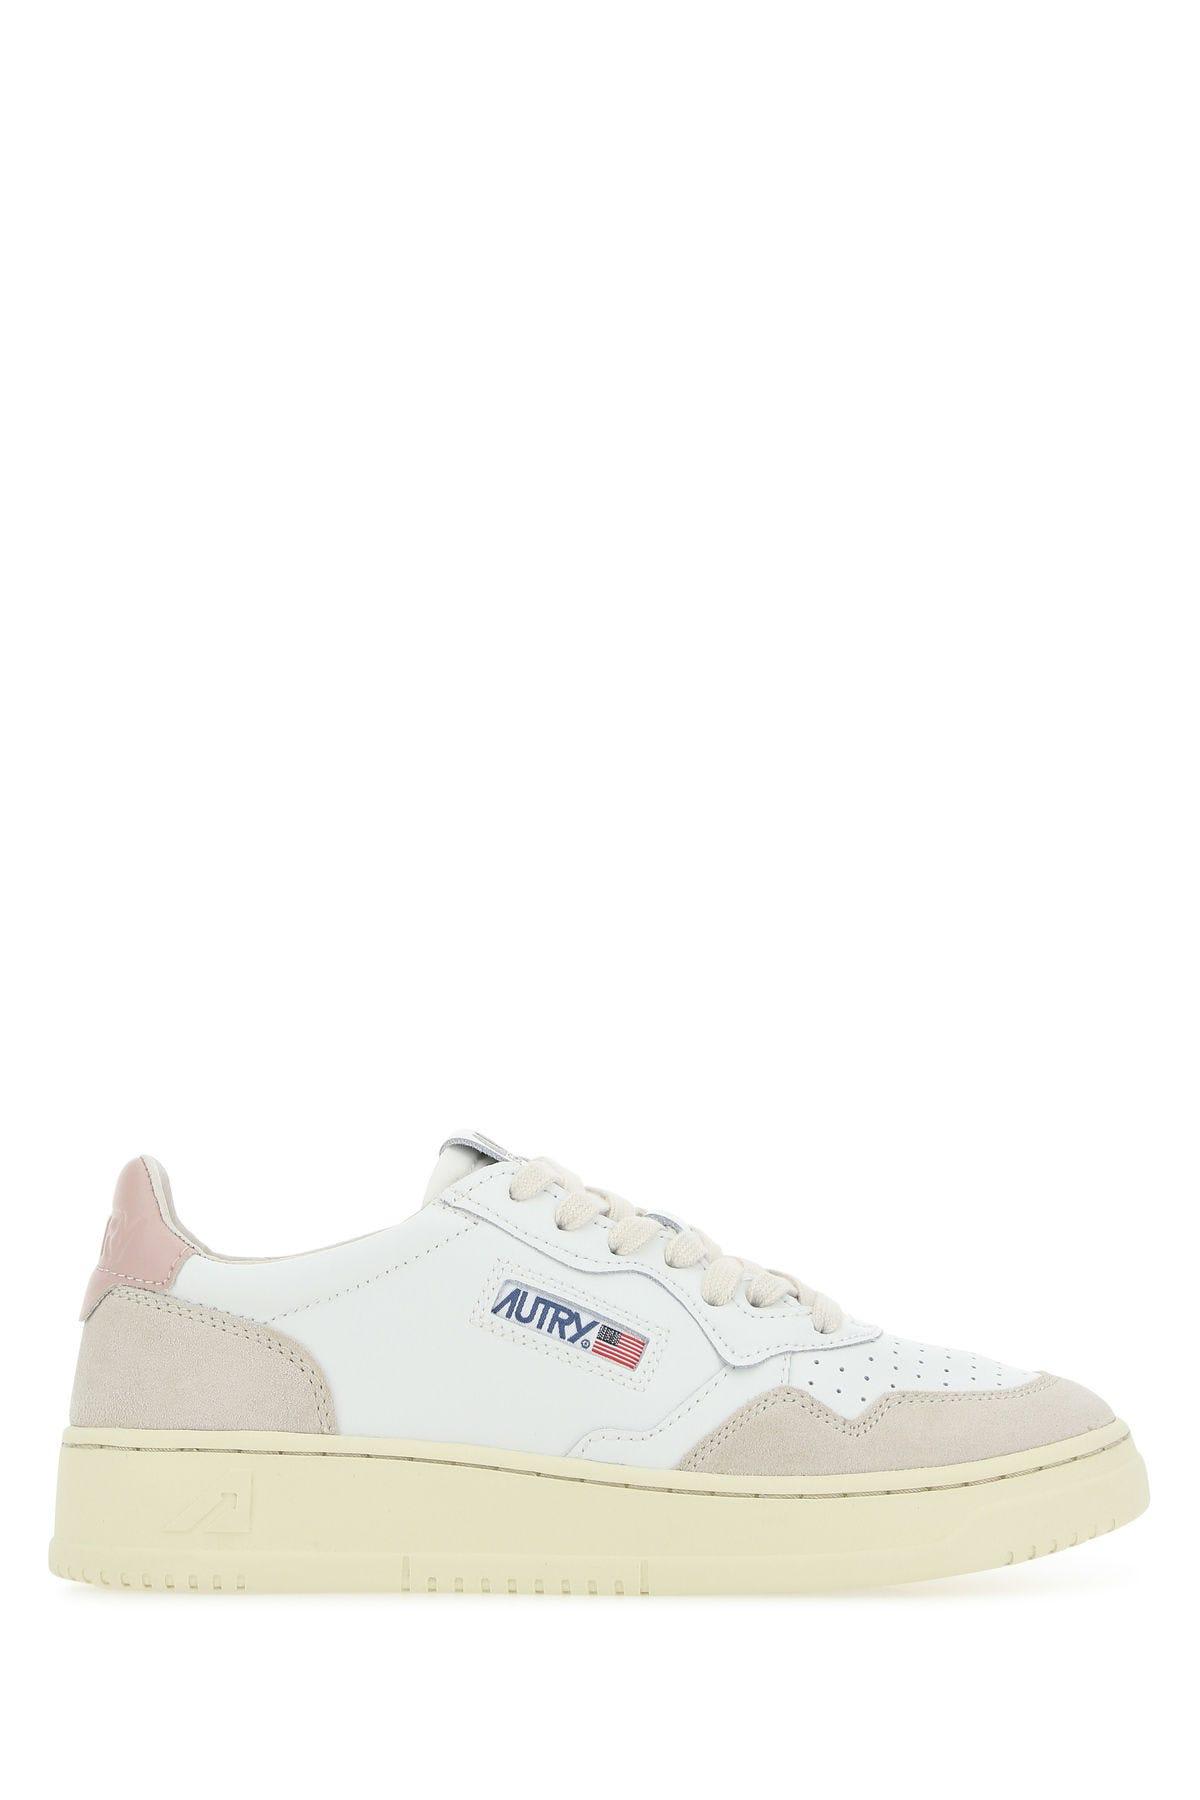 Autry Two-tone Leather And Suede Medalist Sneakers In White Pow